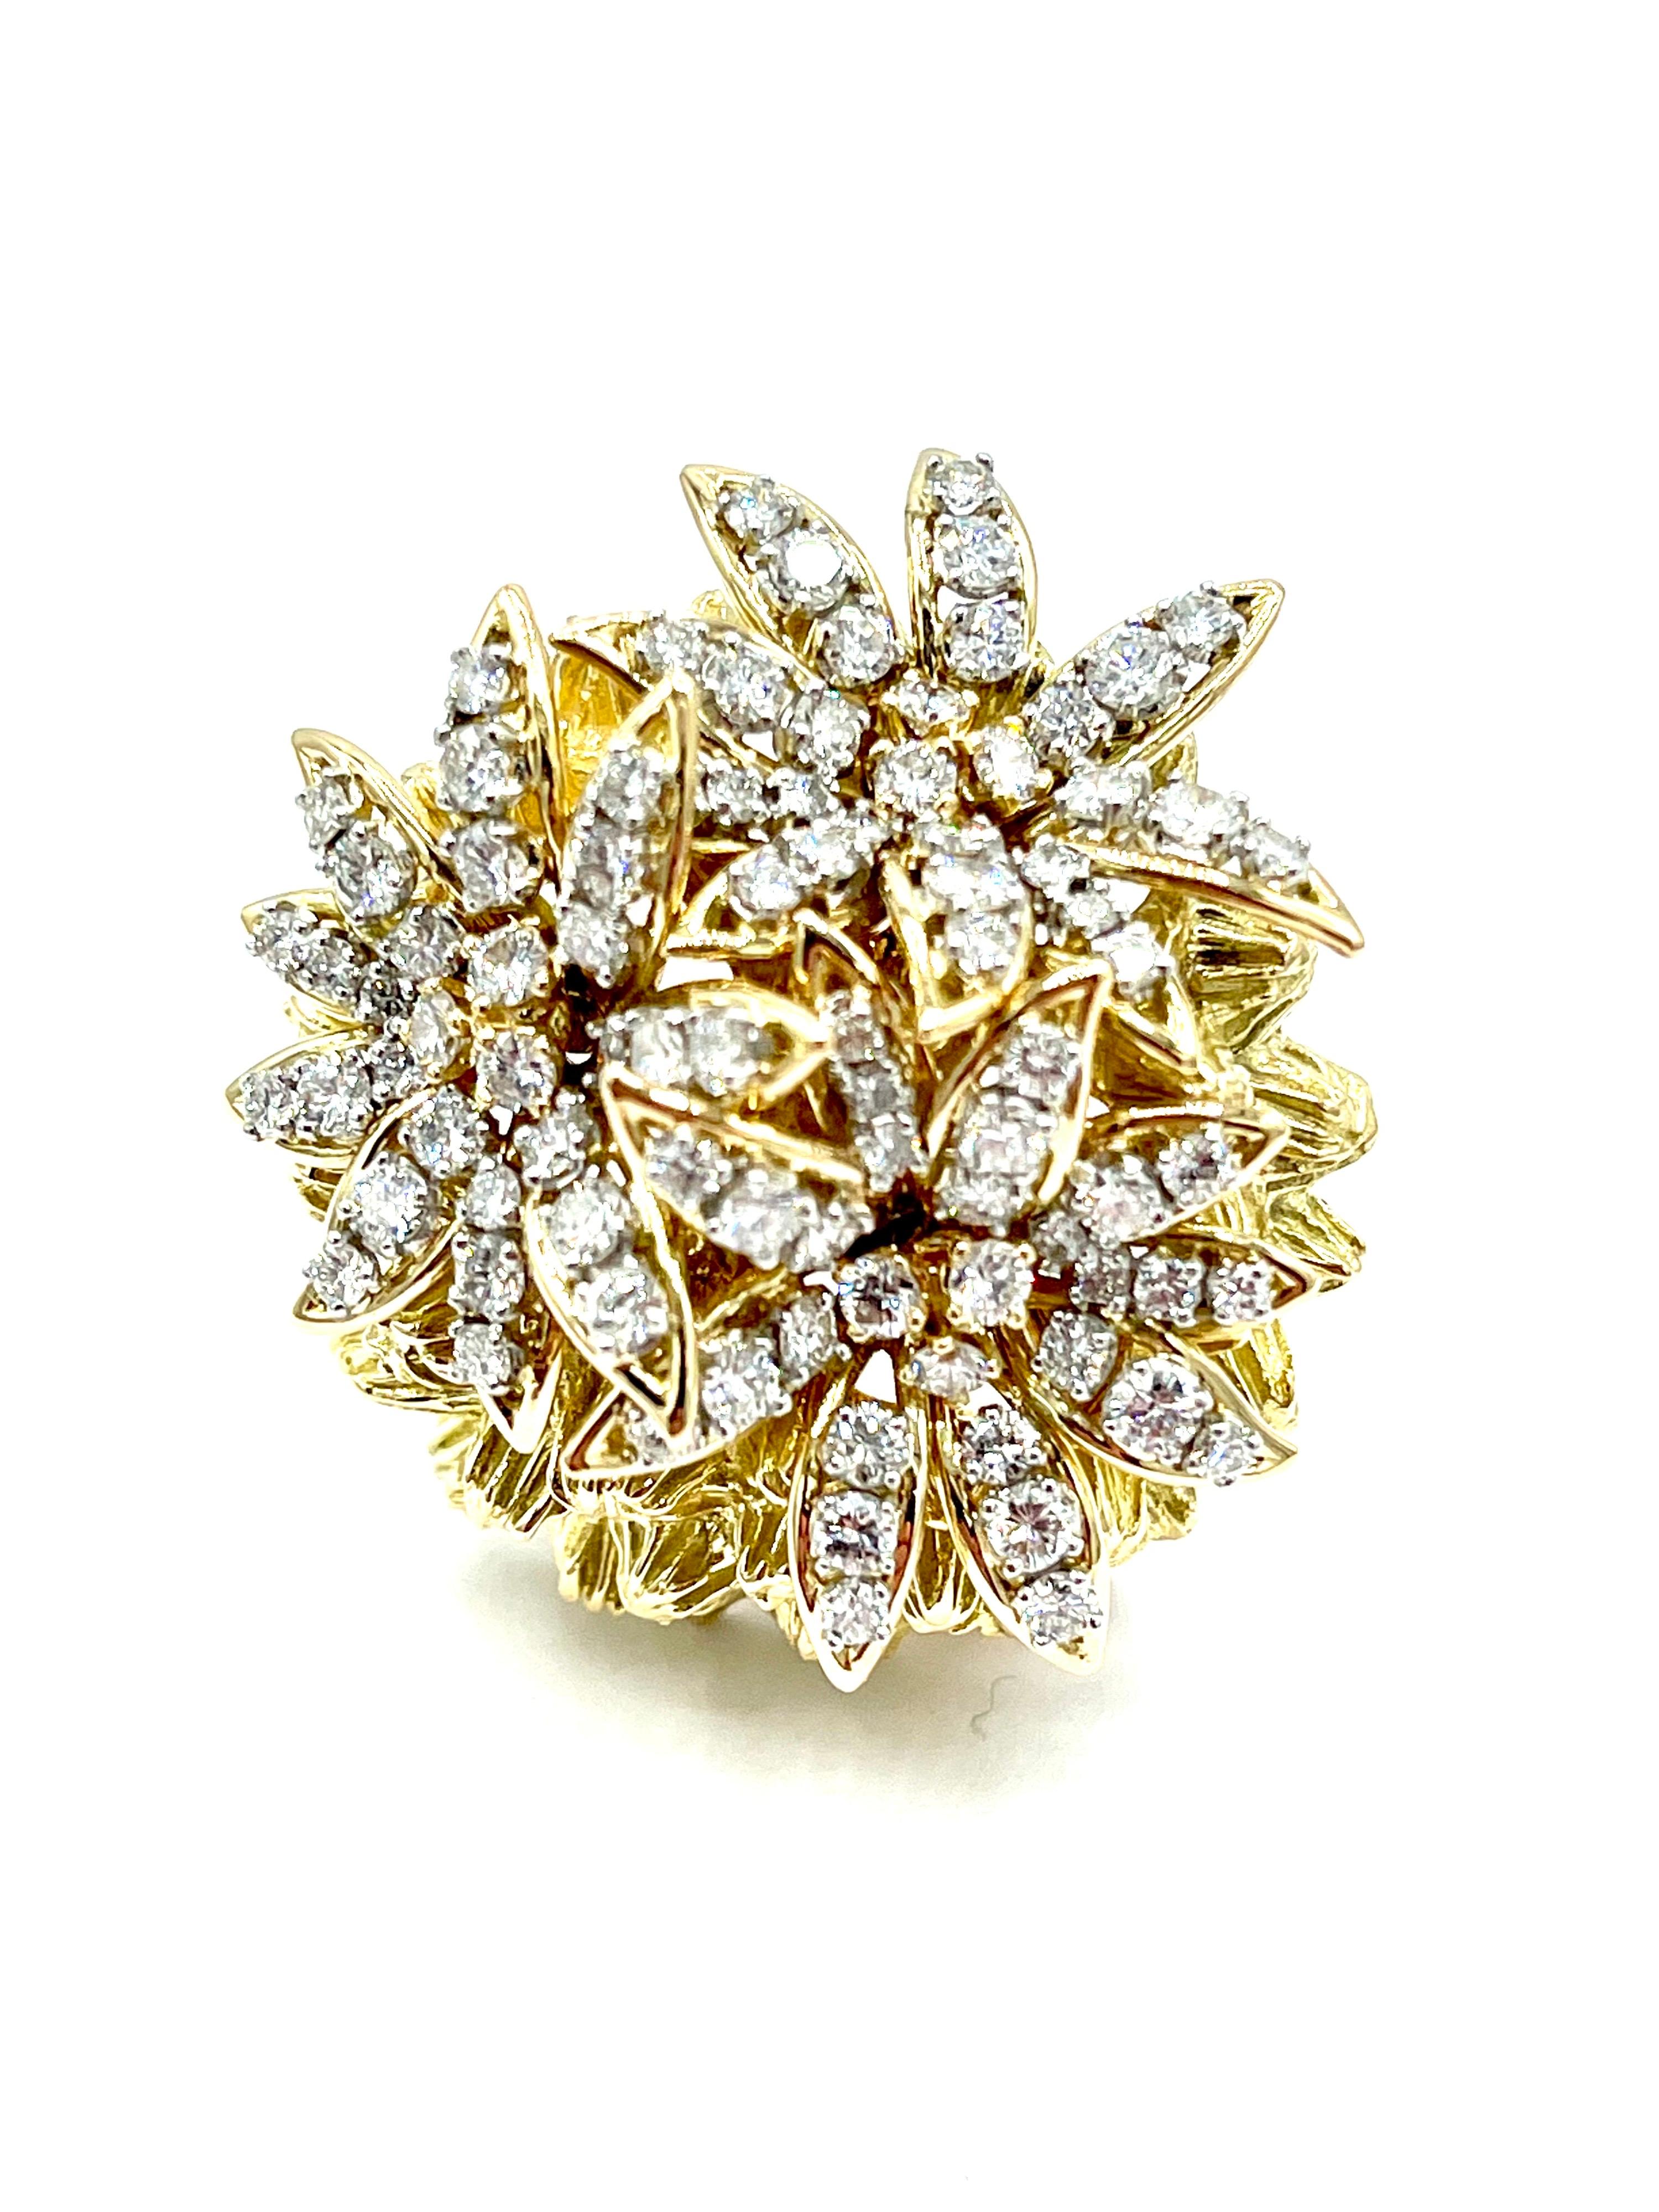 Retro French 3.60 Carat Round Brilliant Diamond Domed 18k Floral Brooch For Sale